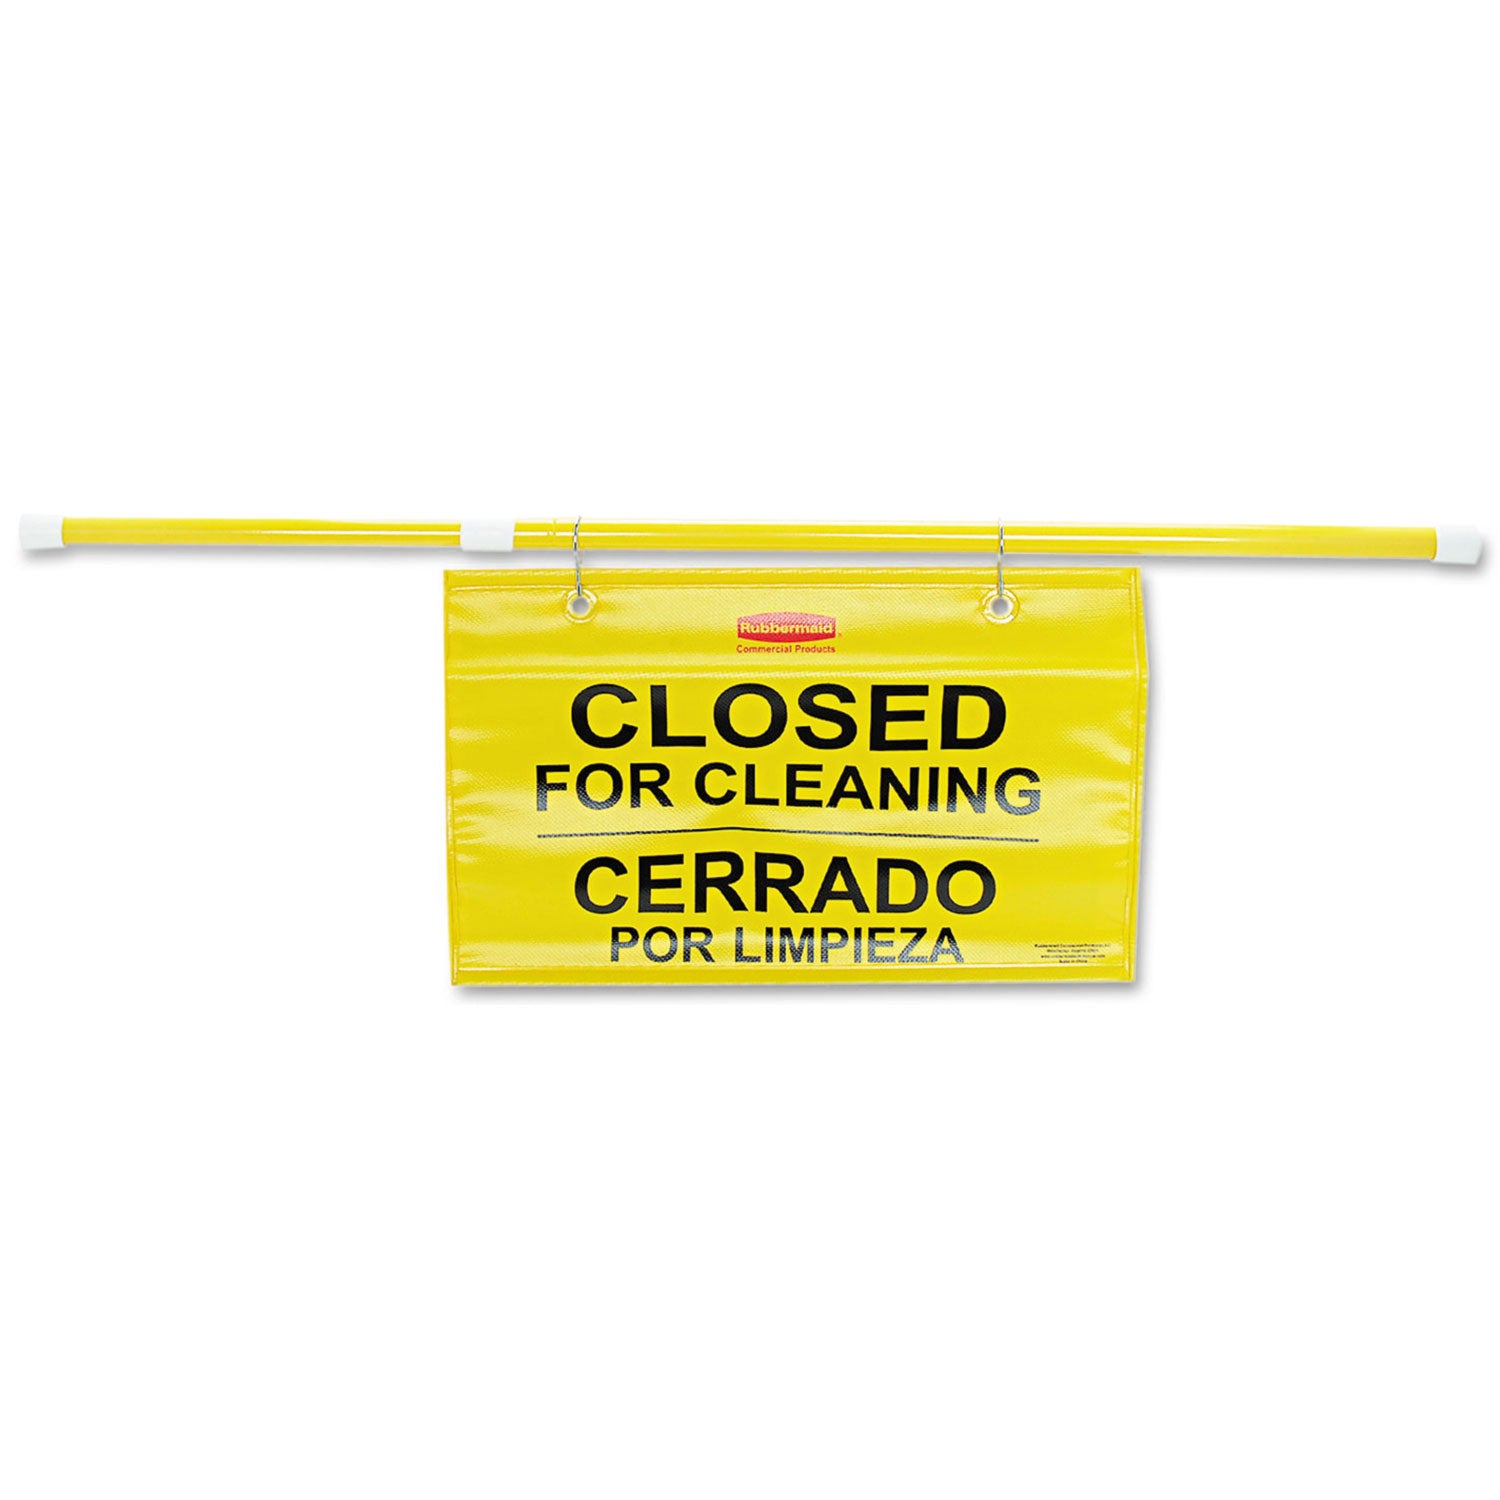 Site Safety Hanging Sign, 50 x 1 x 13, Multi-Lingual, Yellow - 